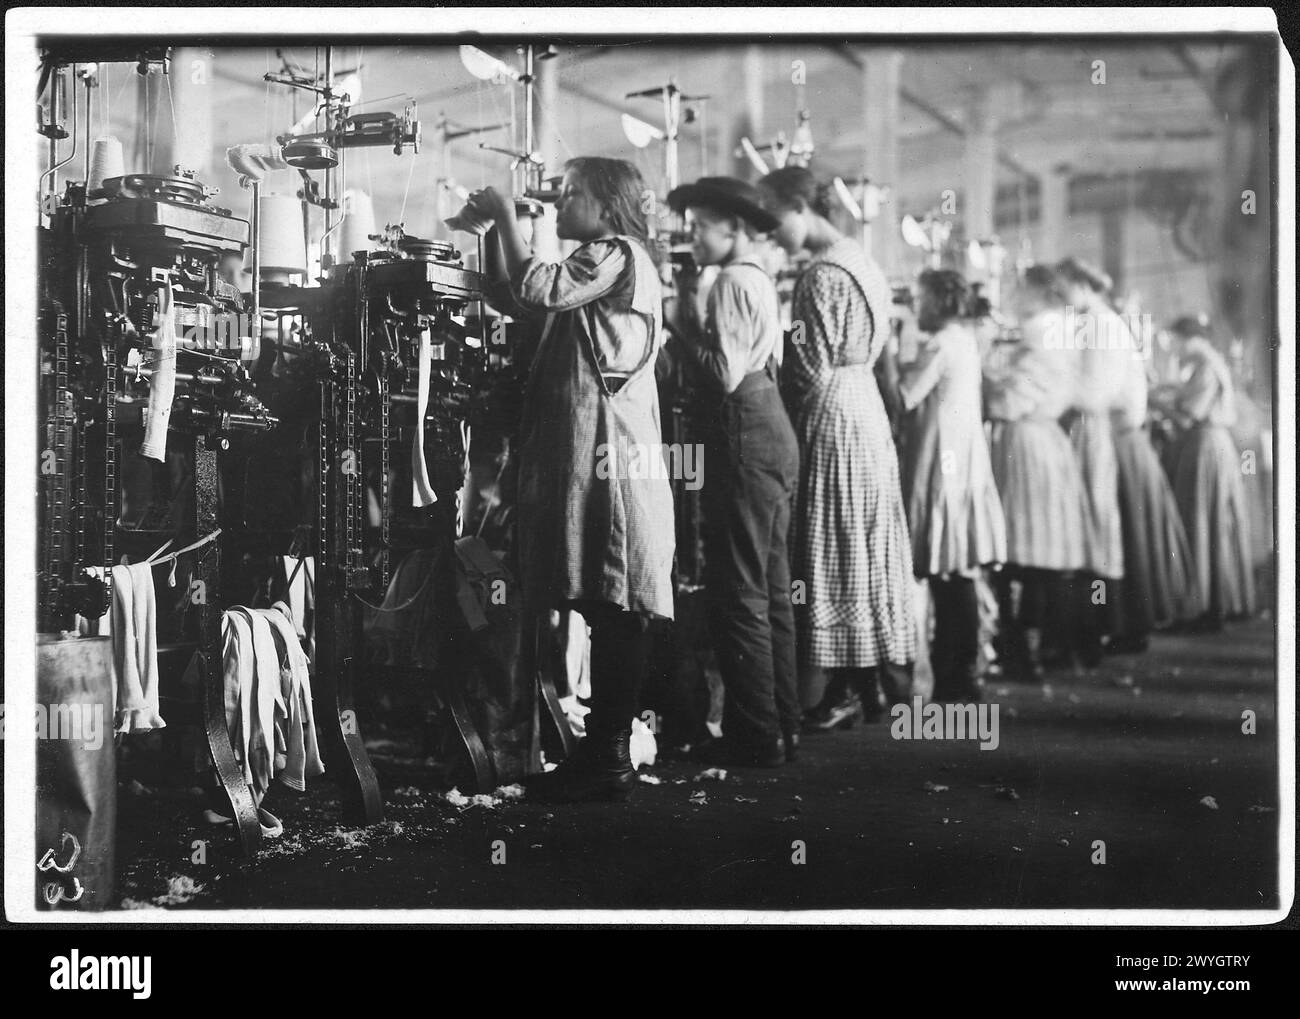 Some of the young children knitters in London Hosiery Mills. Photo during work hours. London, Tenn, December 1910.   Vintage American Photography 1910s. Child Labour Project.  Credit: Lewis Hines Stock Photo